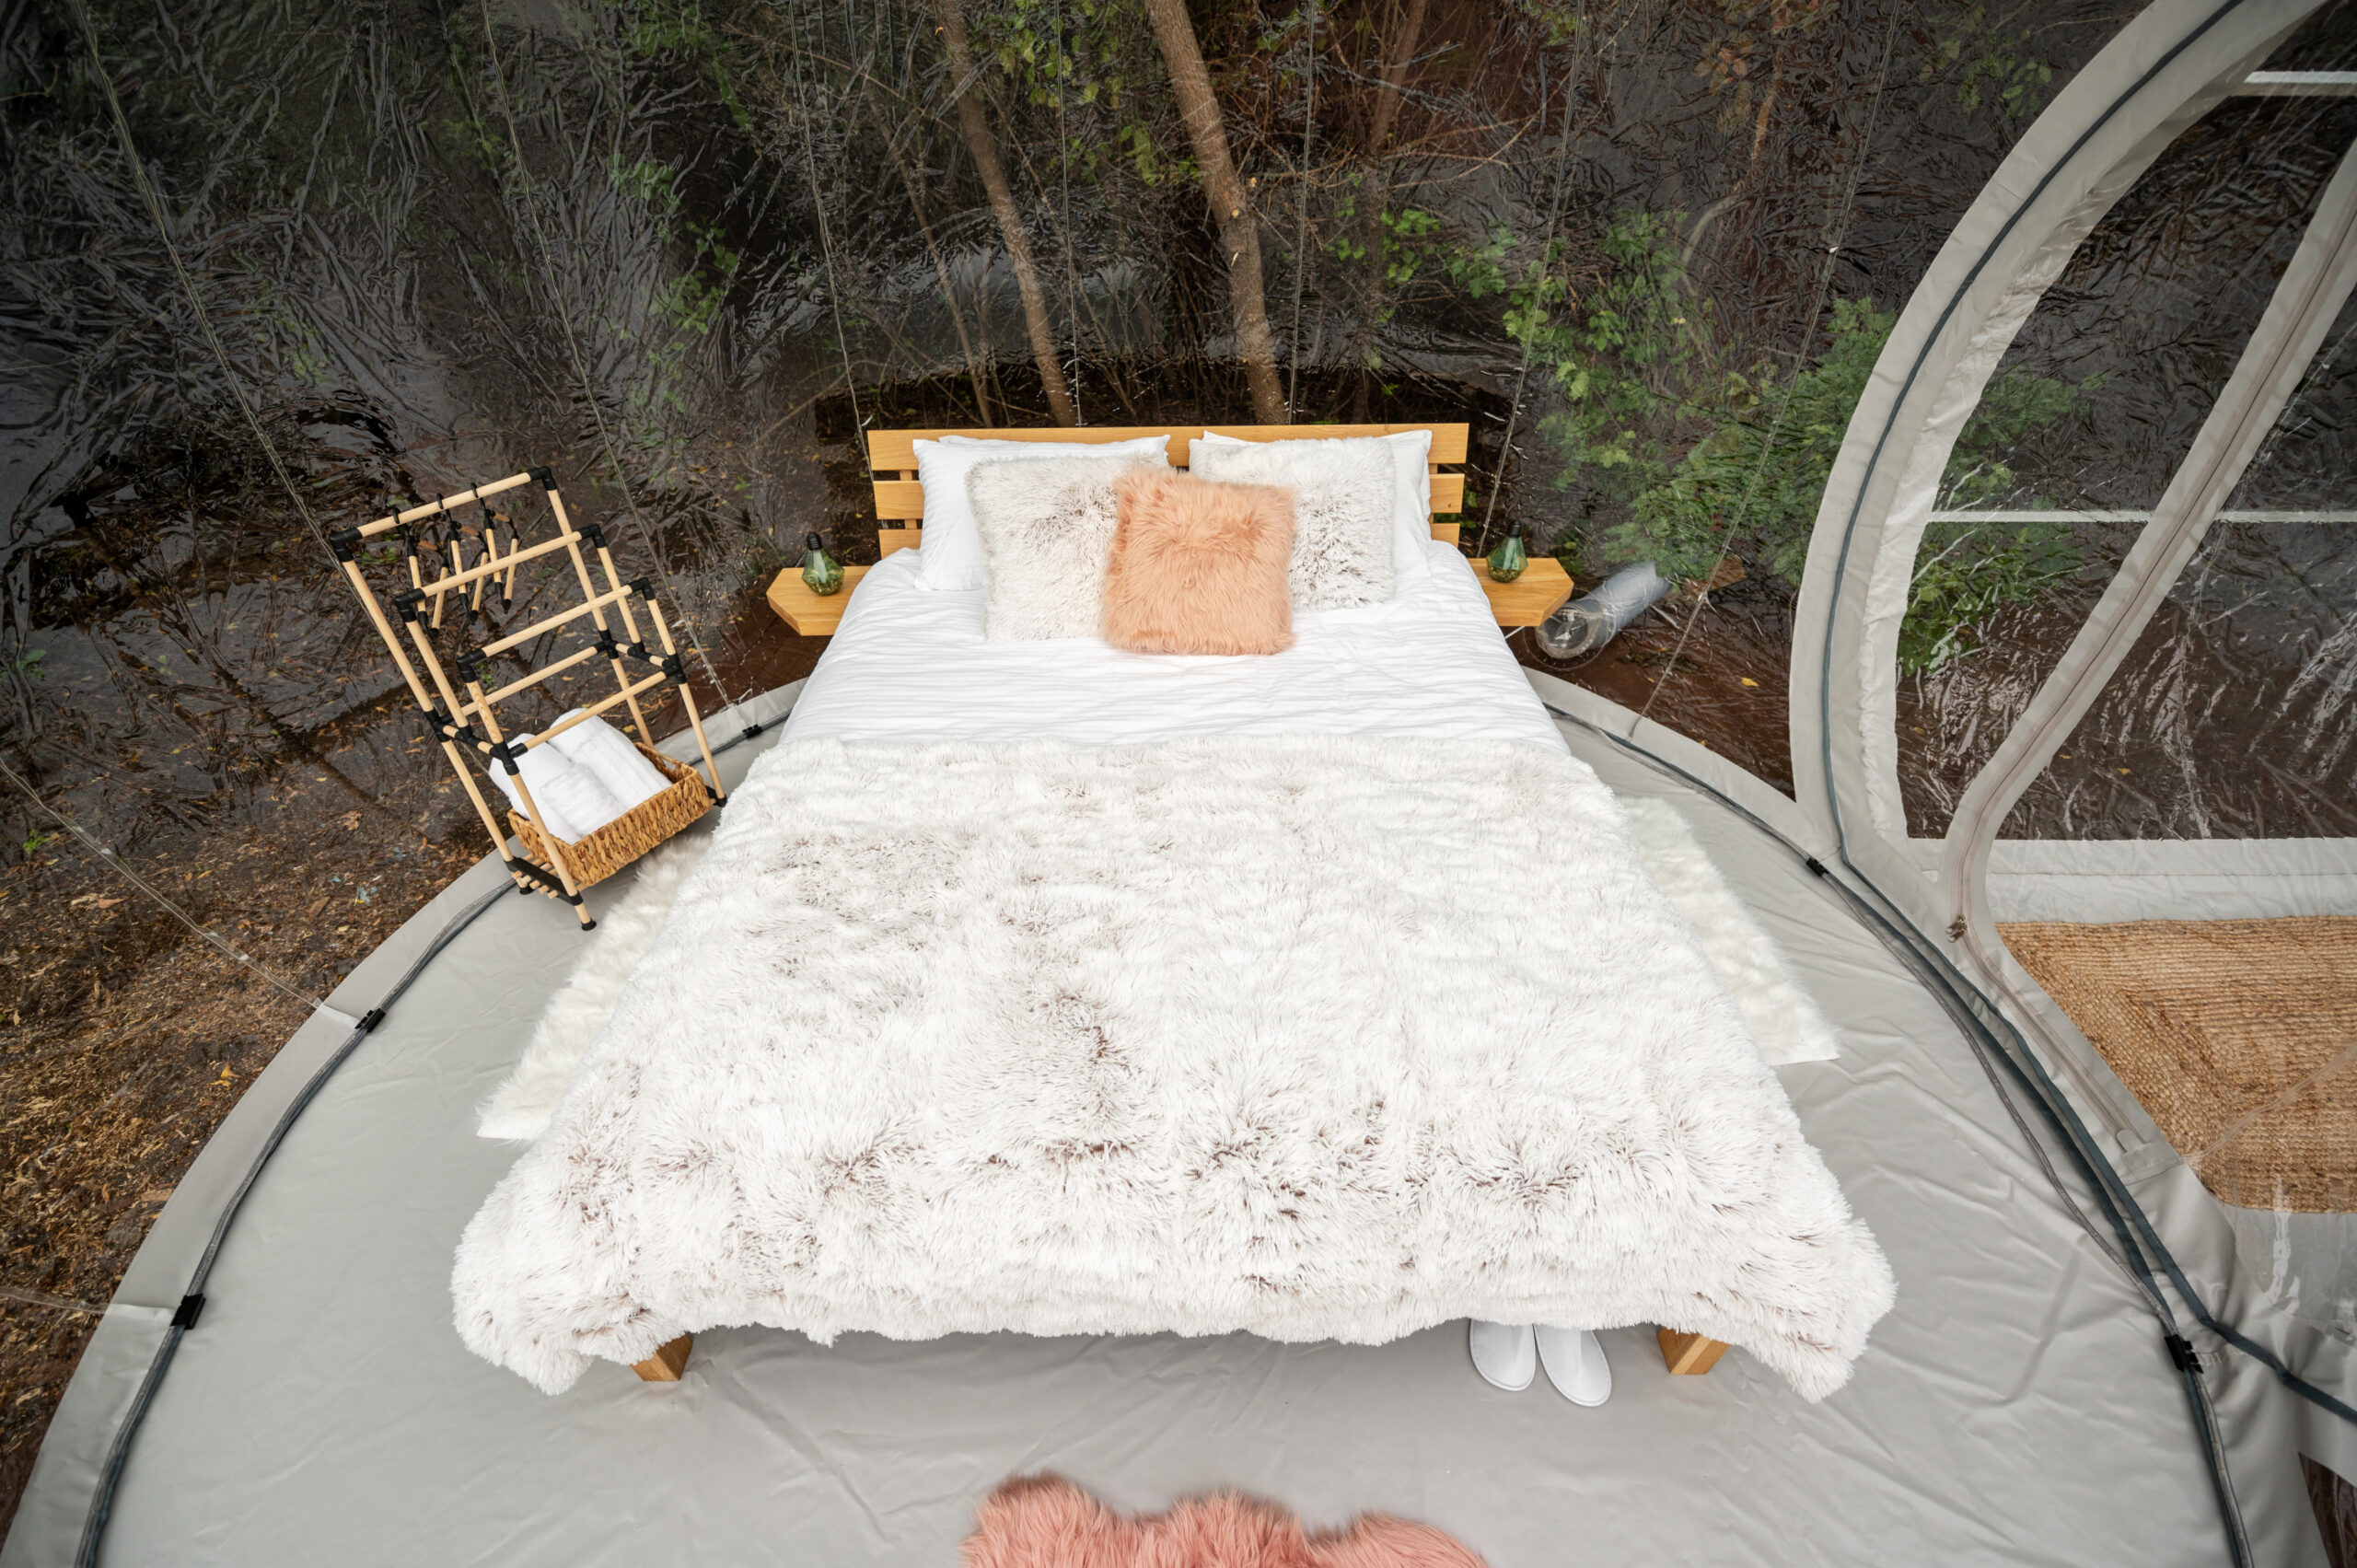 Transparent bubble tent at glamping, Lush forest around and interior. View from inside